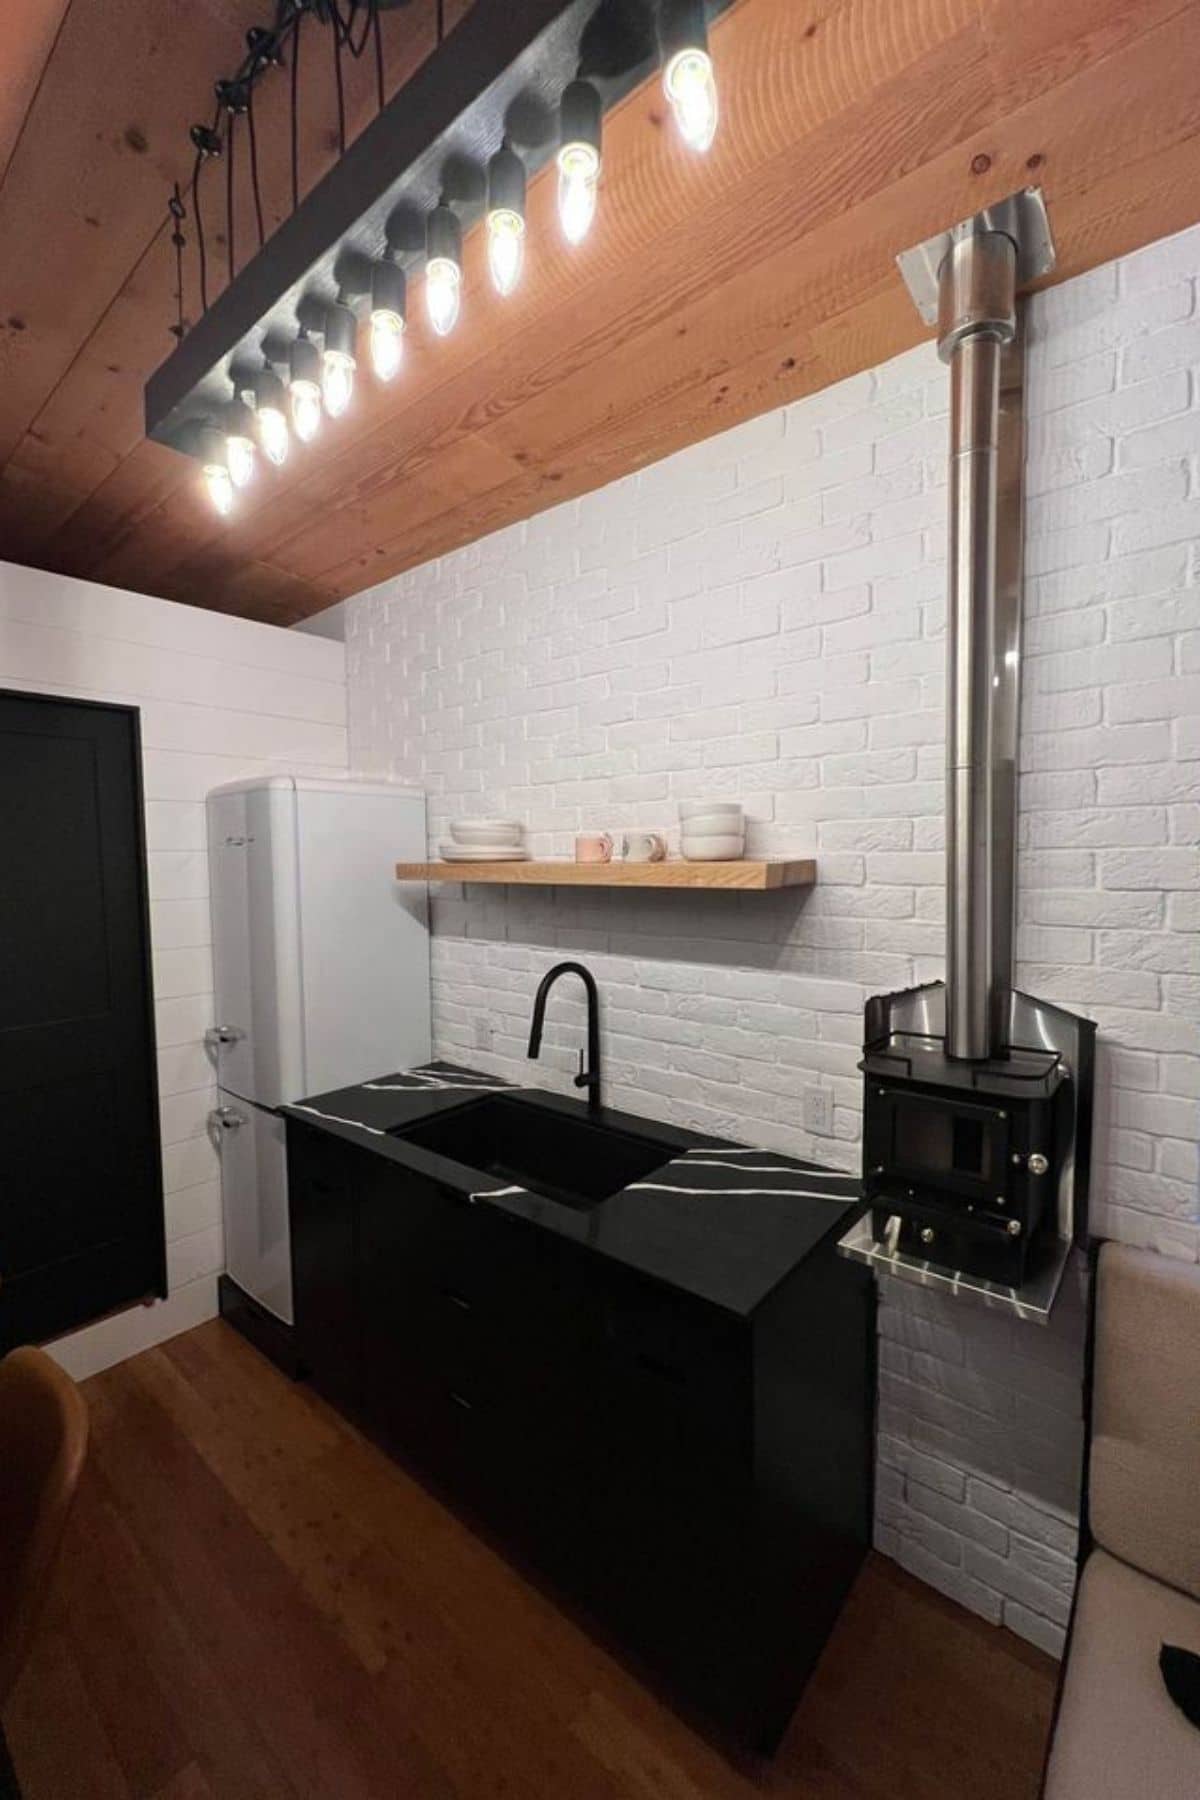 stove on wall next to black cabinets with sink in middle and wood shelf above